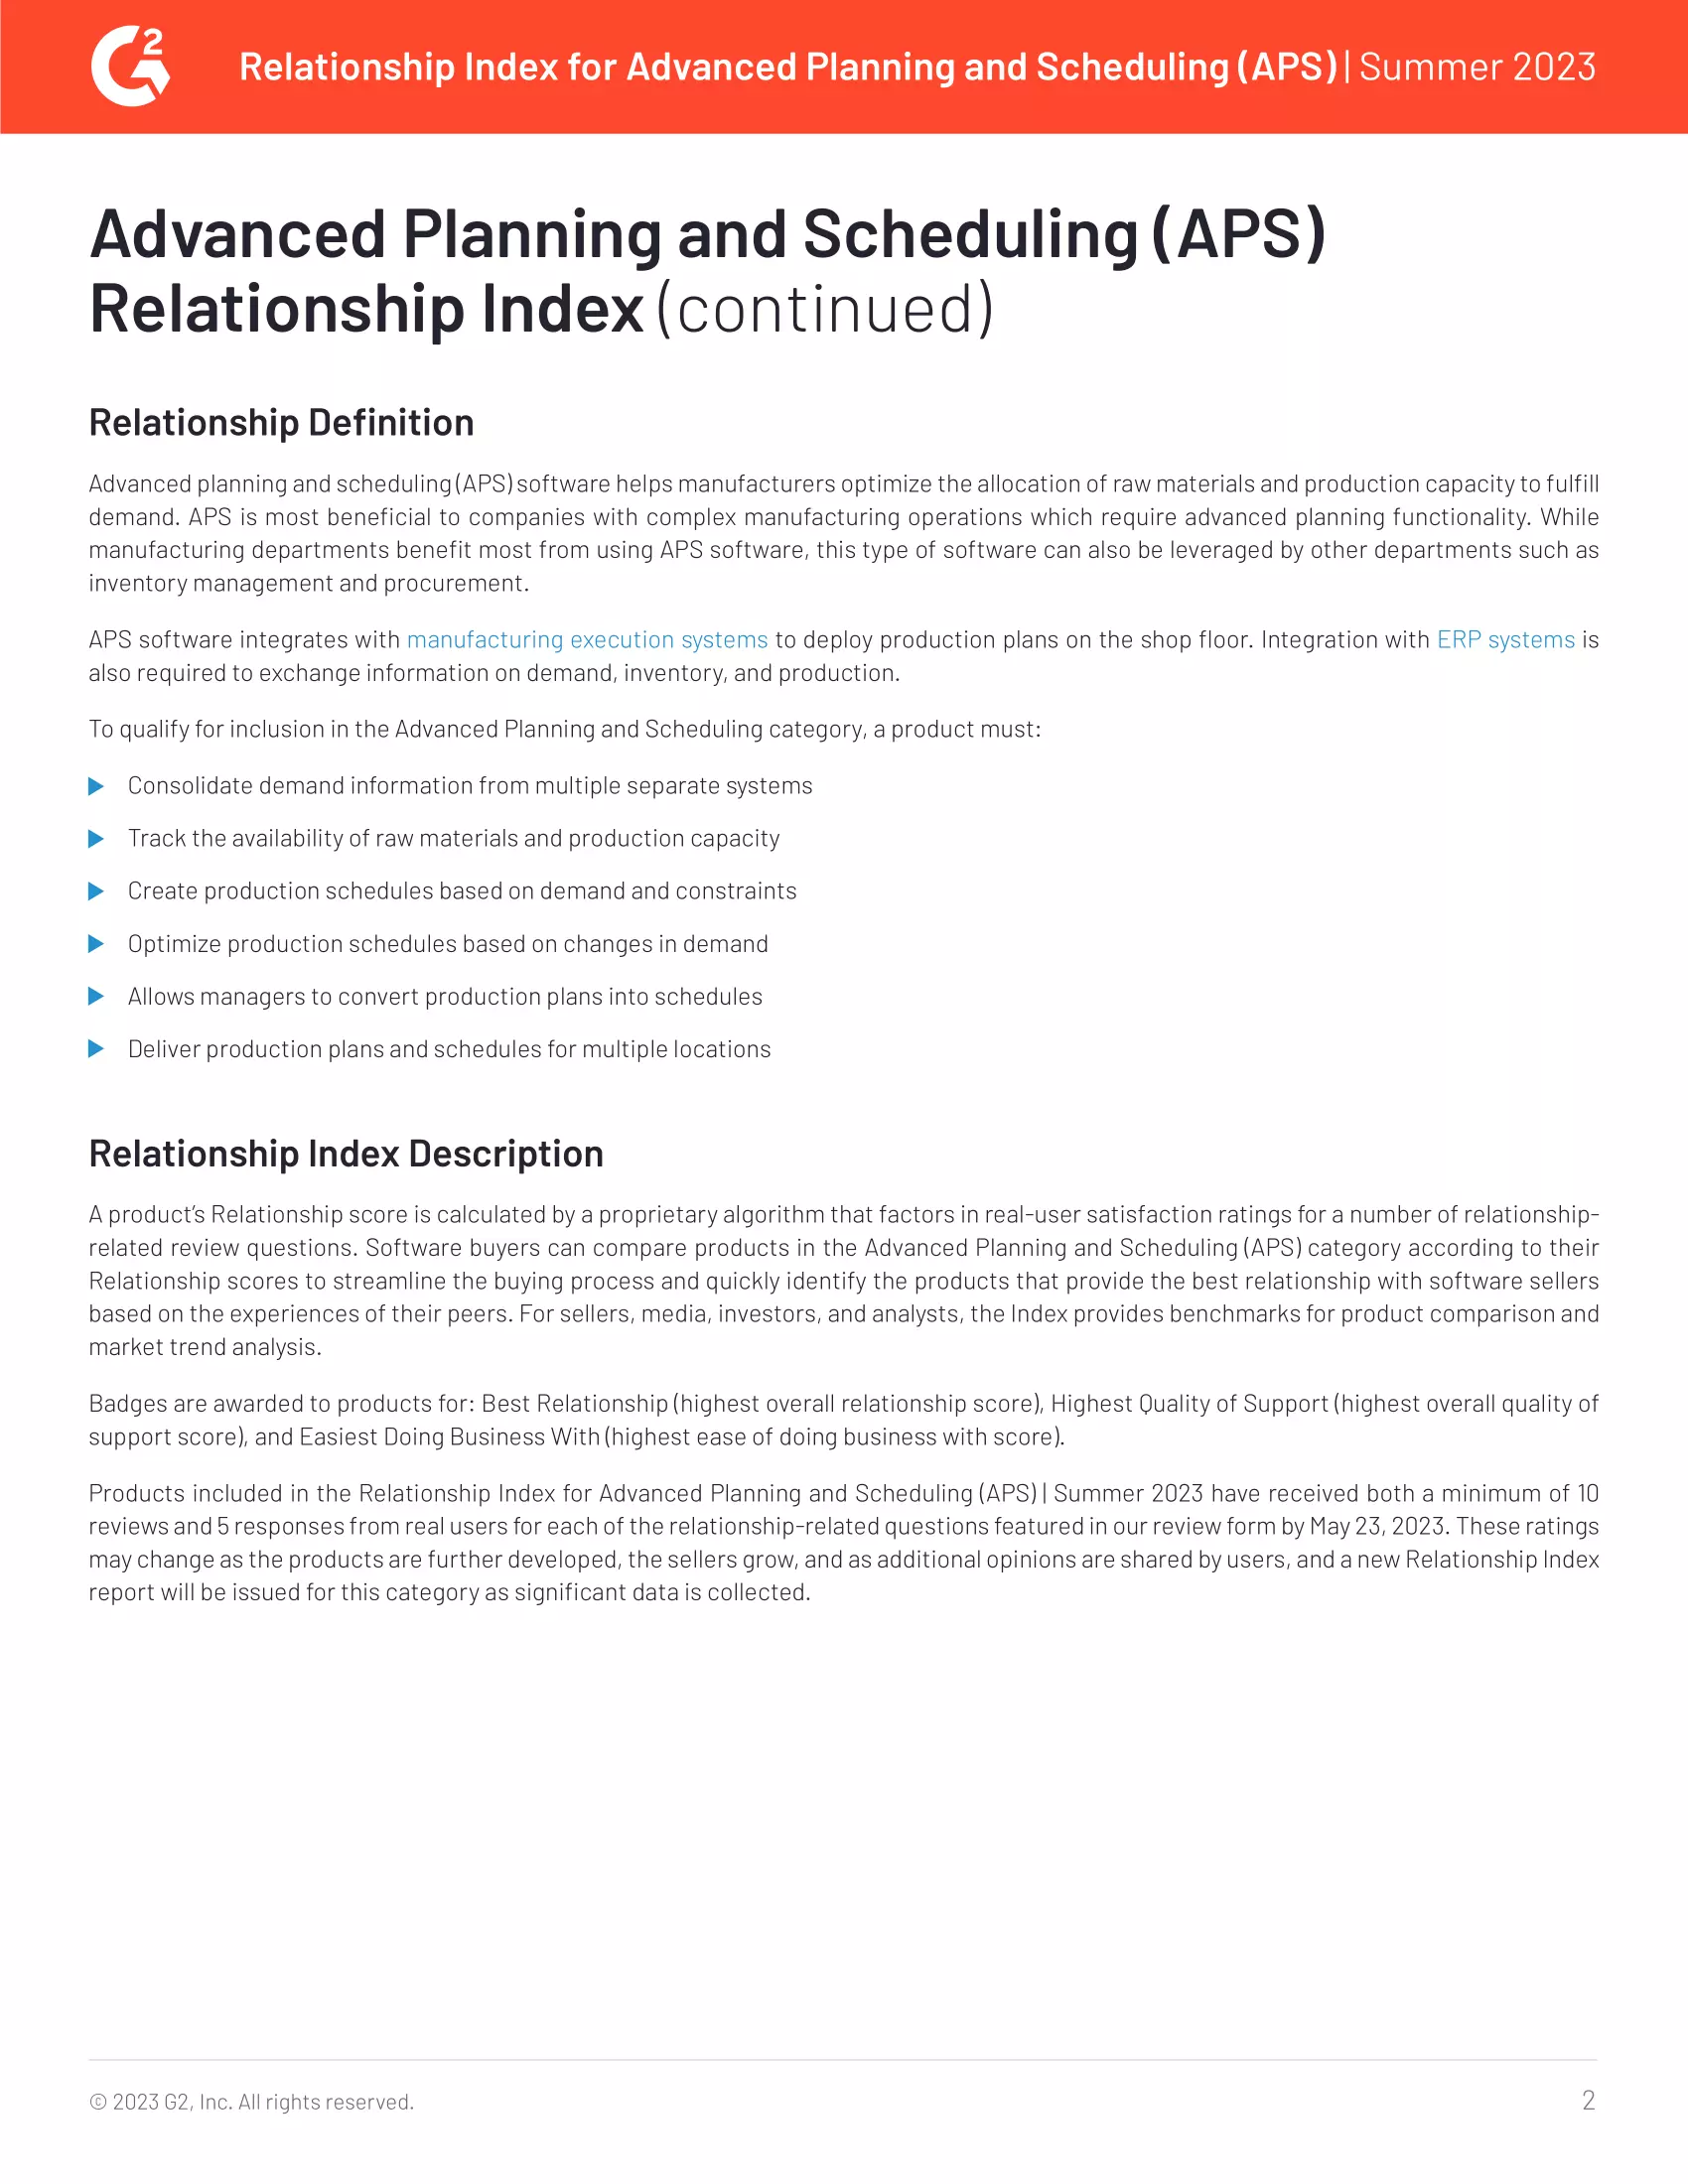 Acumatica Triumphs in New G2 Relationship Index, page 1